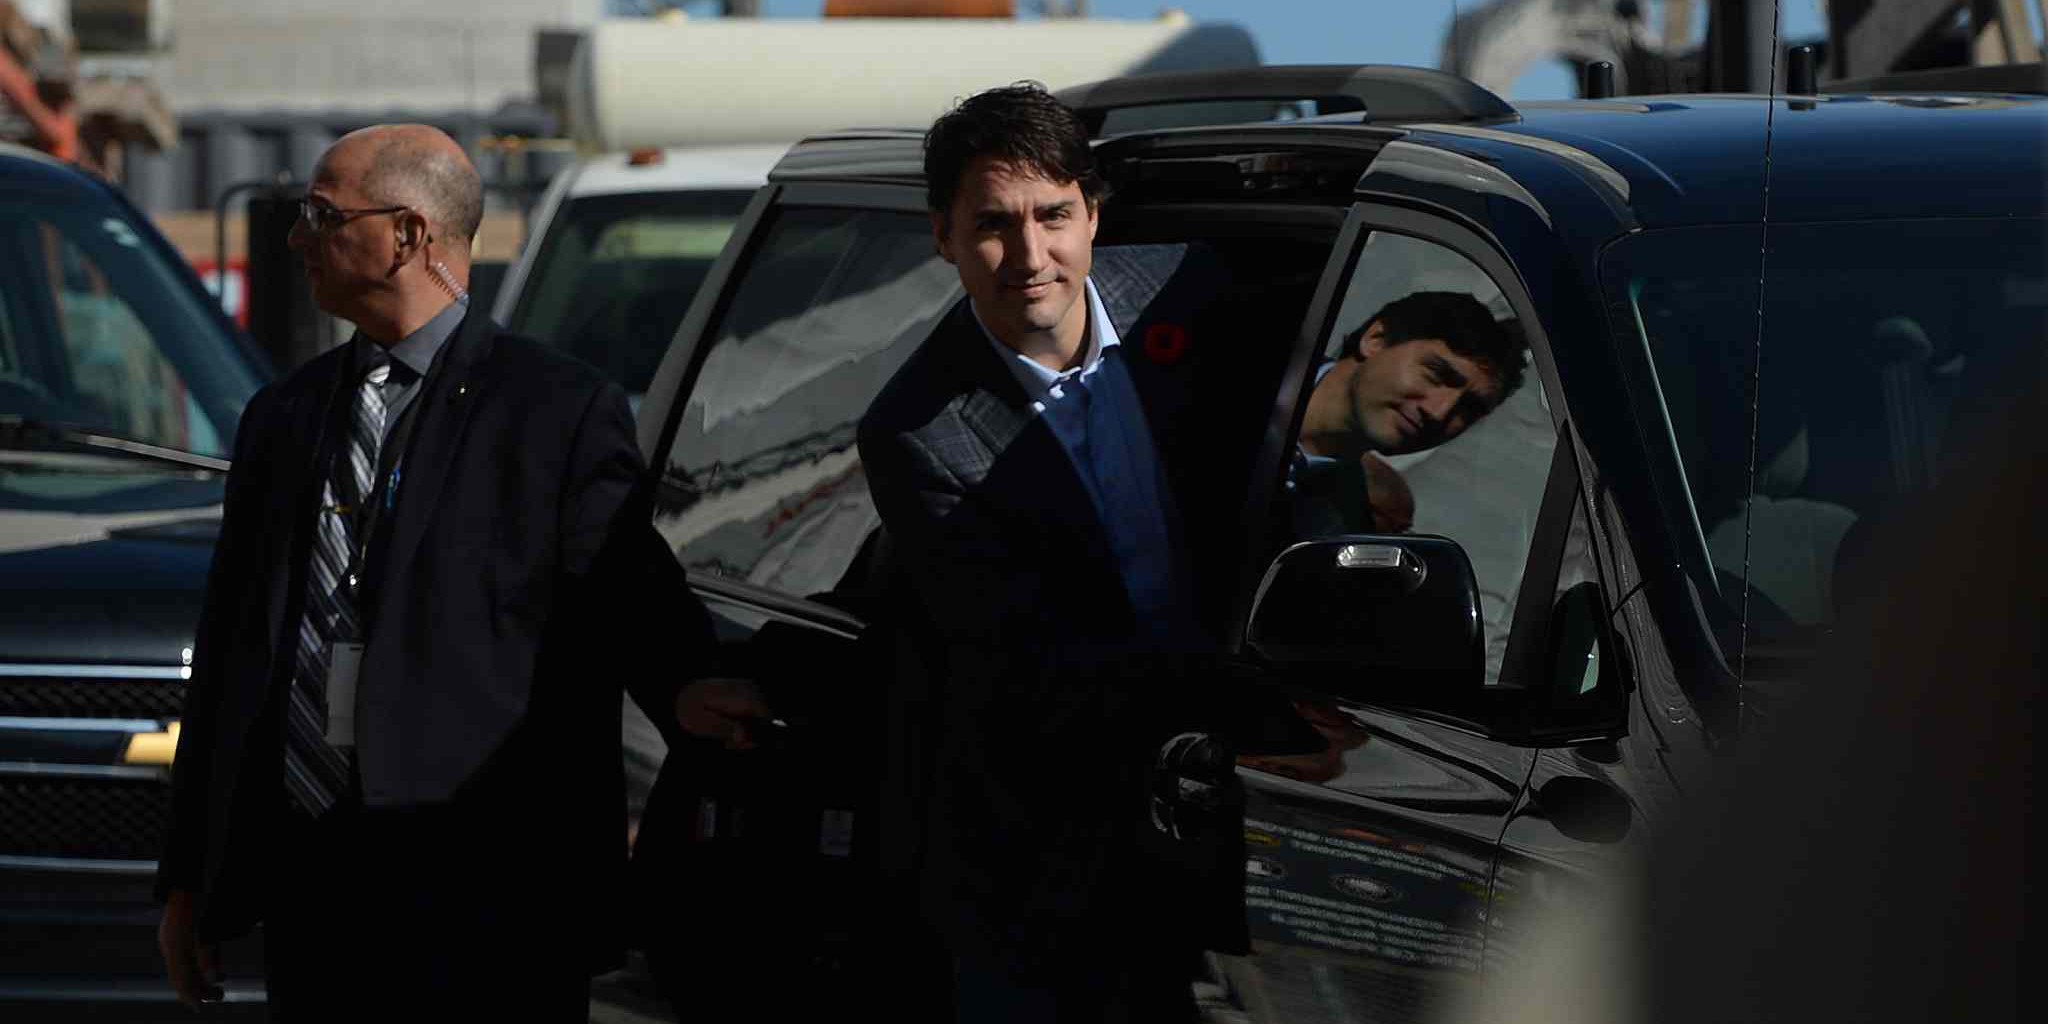 Prime minister-designate Justin Trudeau enters his car after taking a tour of the West Block construction site on Parliament Hill in Ottawa on Tuesday, November 3, 2015. THE CANADIAN PRESS/Sean Kilpatrick